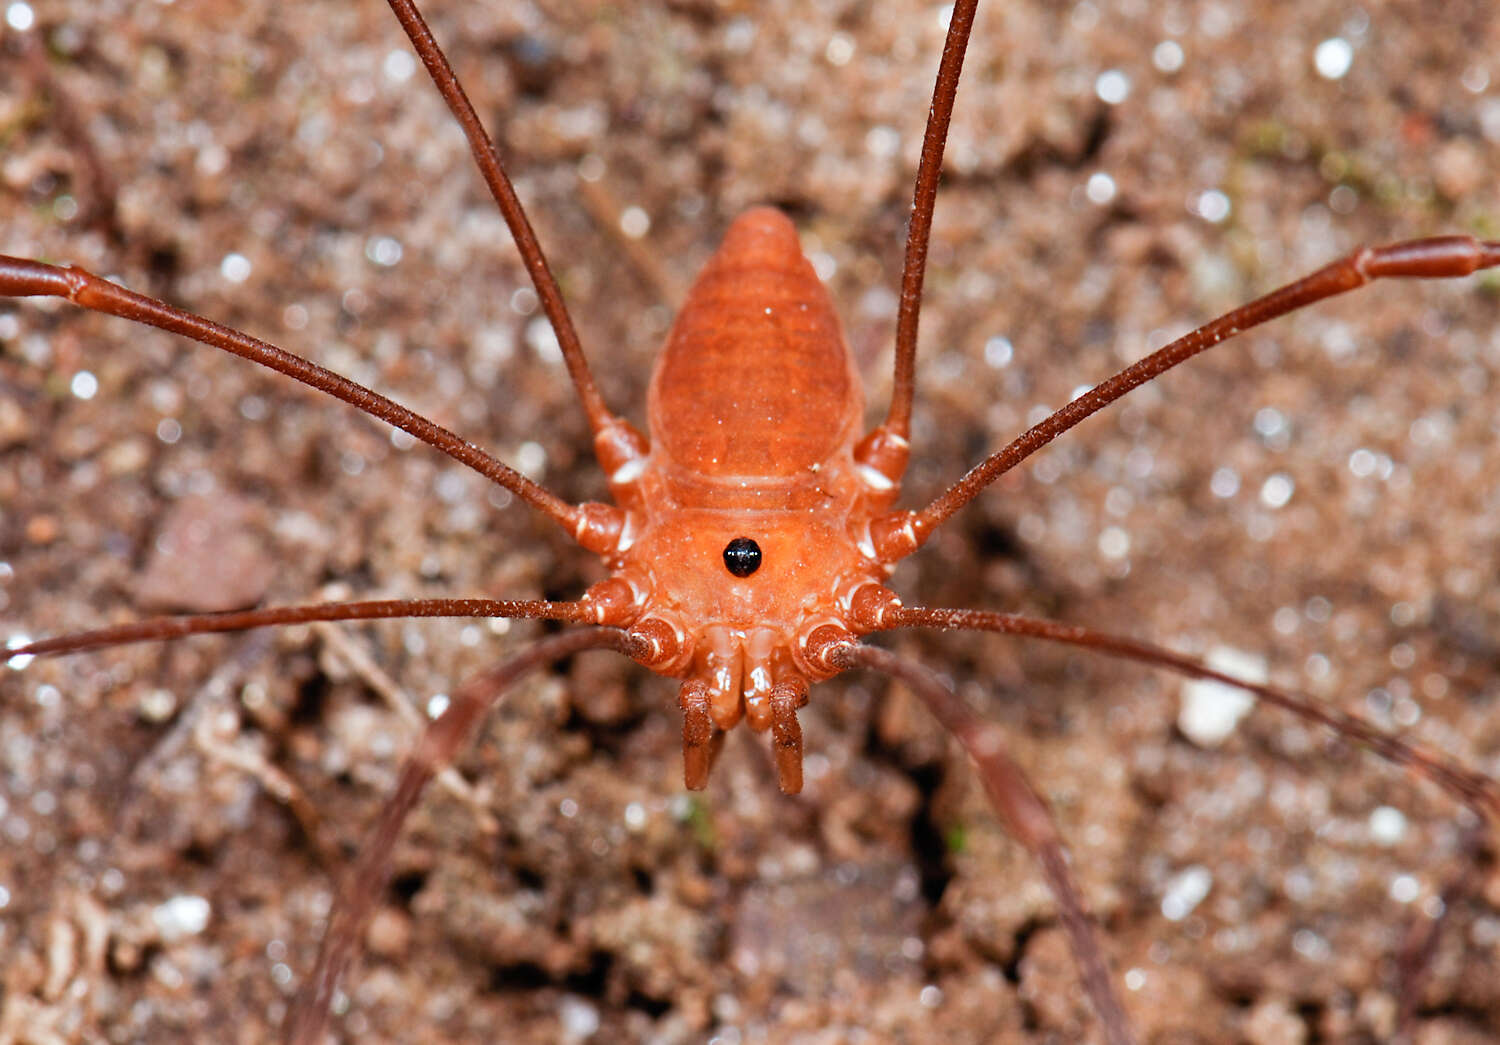 Image of Daddy-long-legs